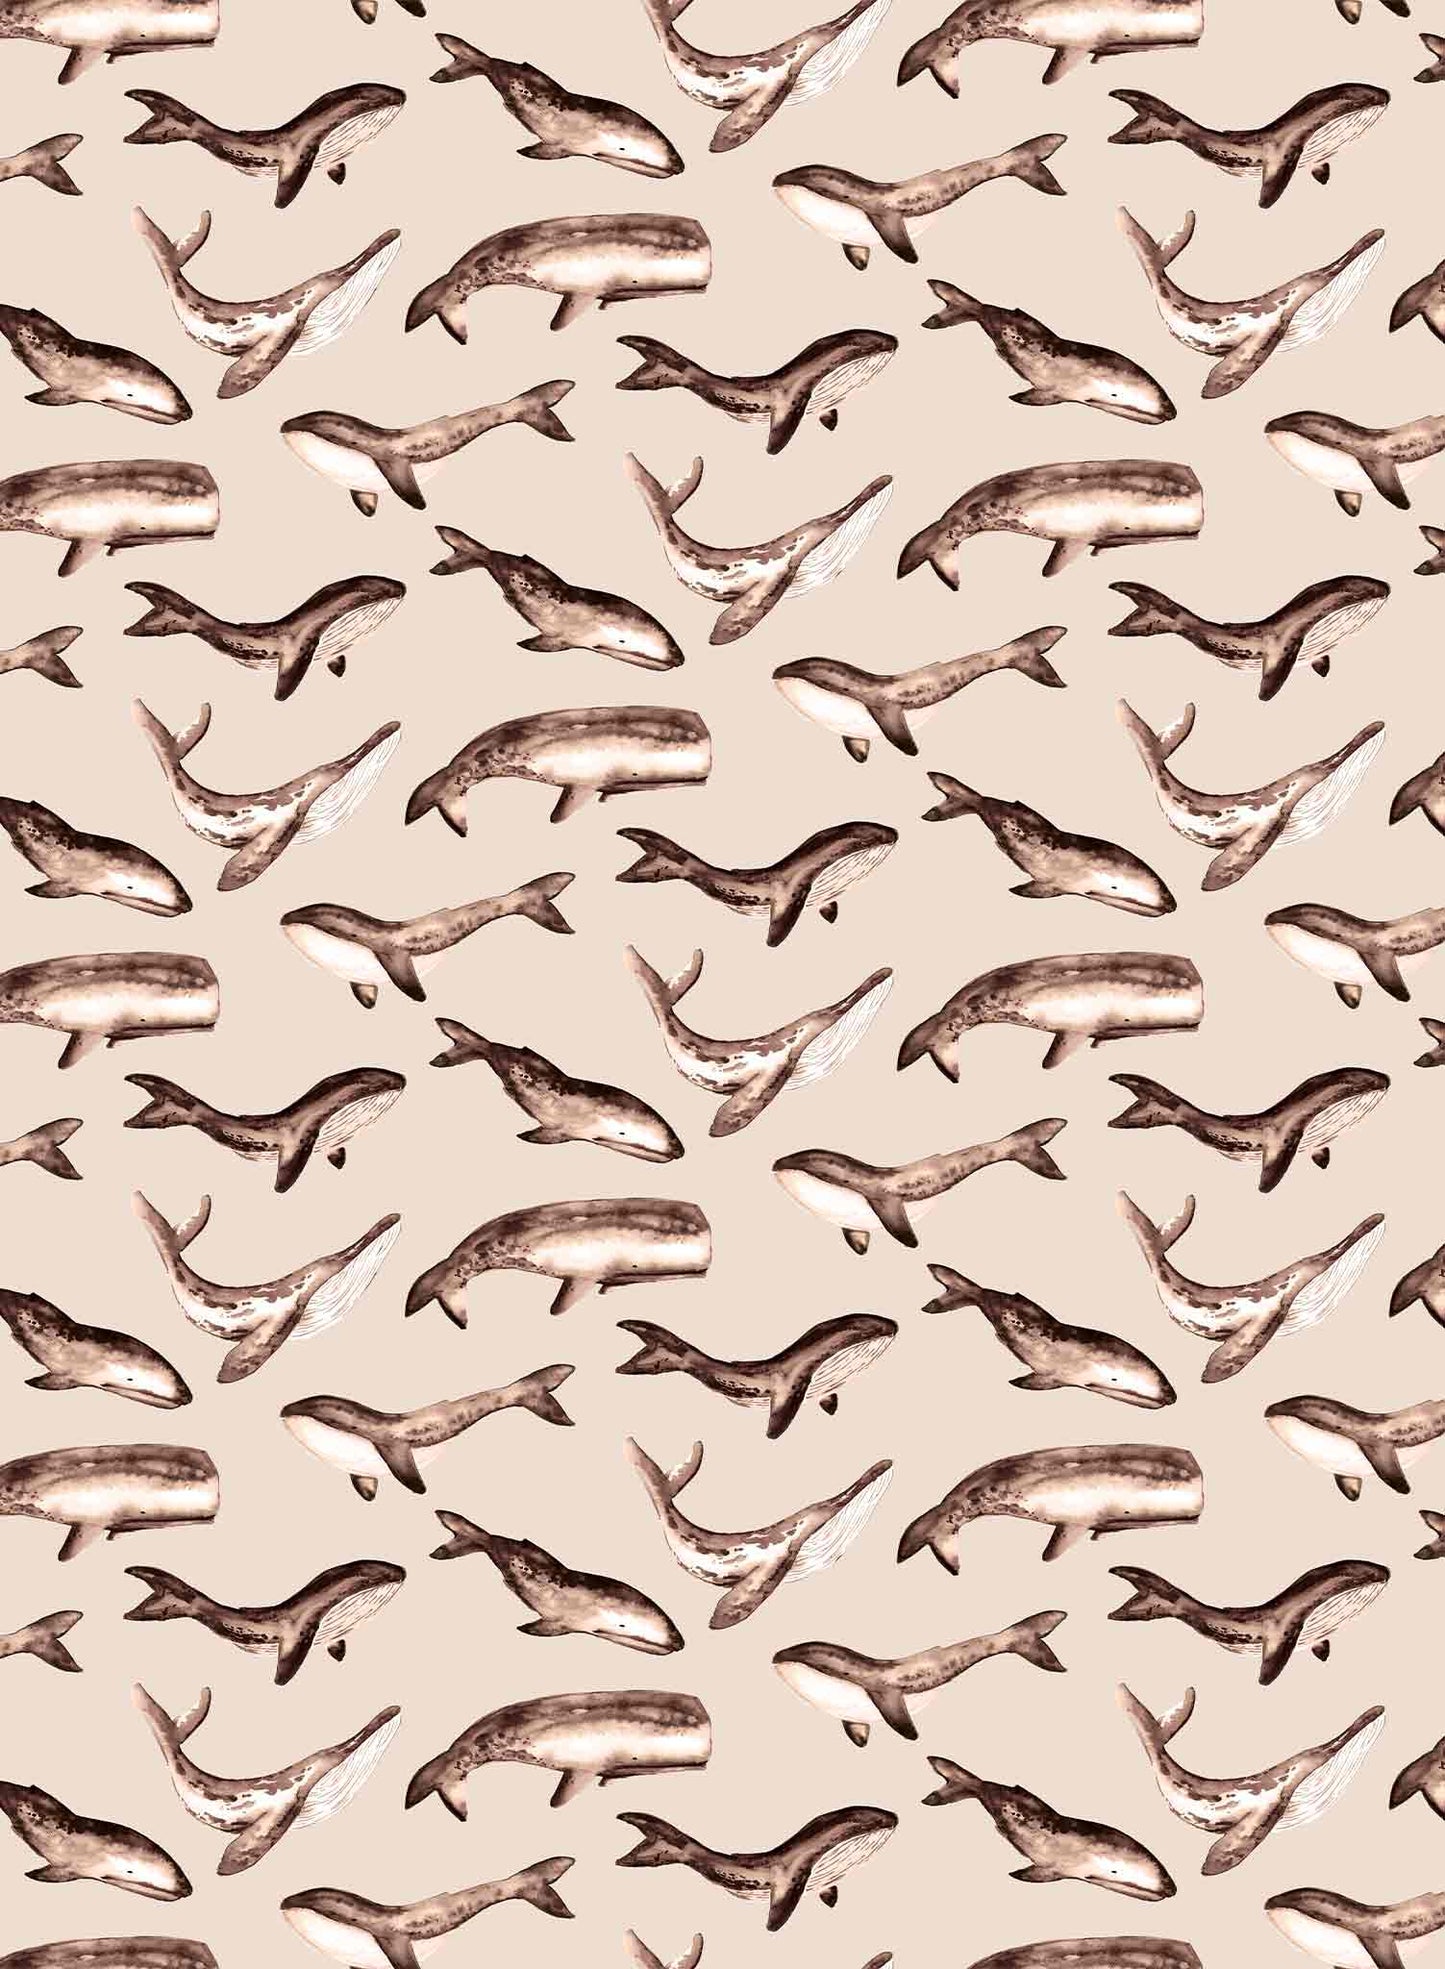 Whale Tale is a minimalist wallpaper by Opposite Wall of a collection of various whale types.